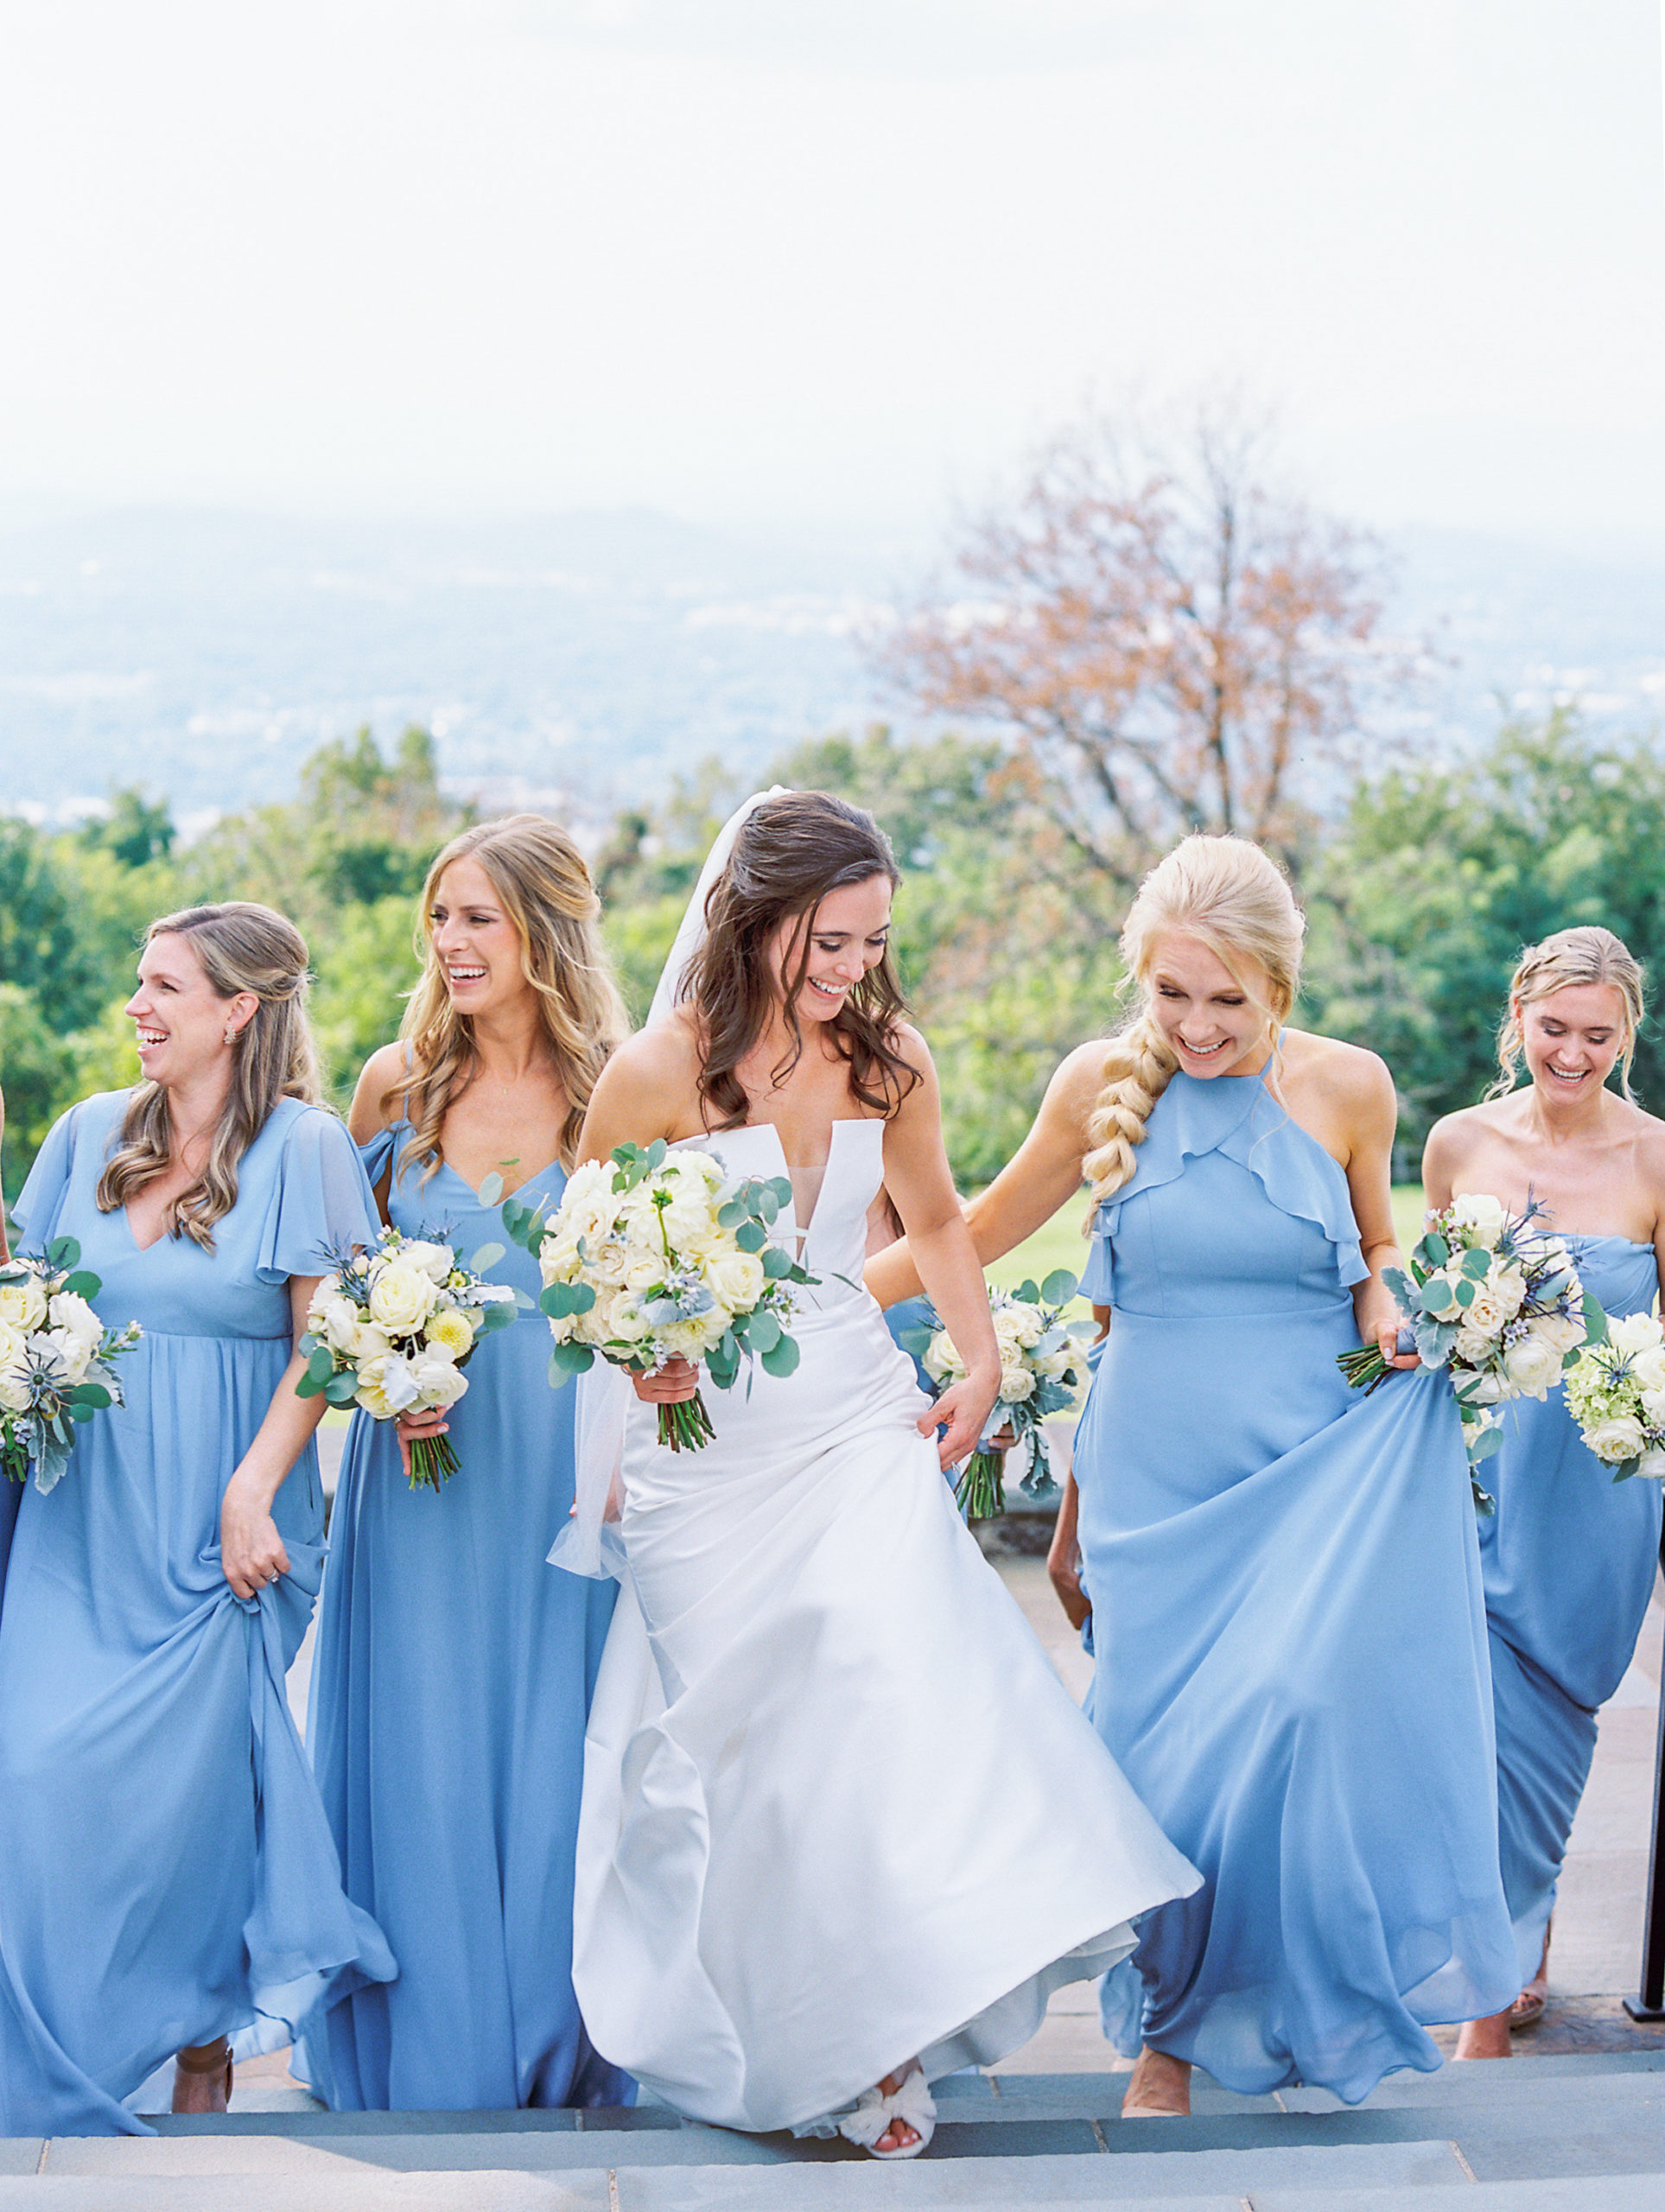 Bridesmaids in blue dresses walk with bride and smile holding rose bouquets 